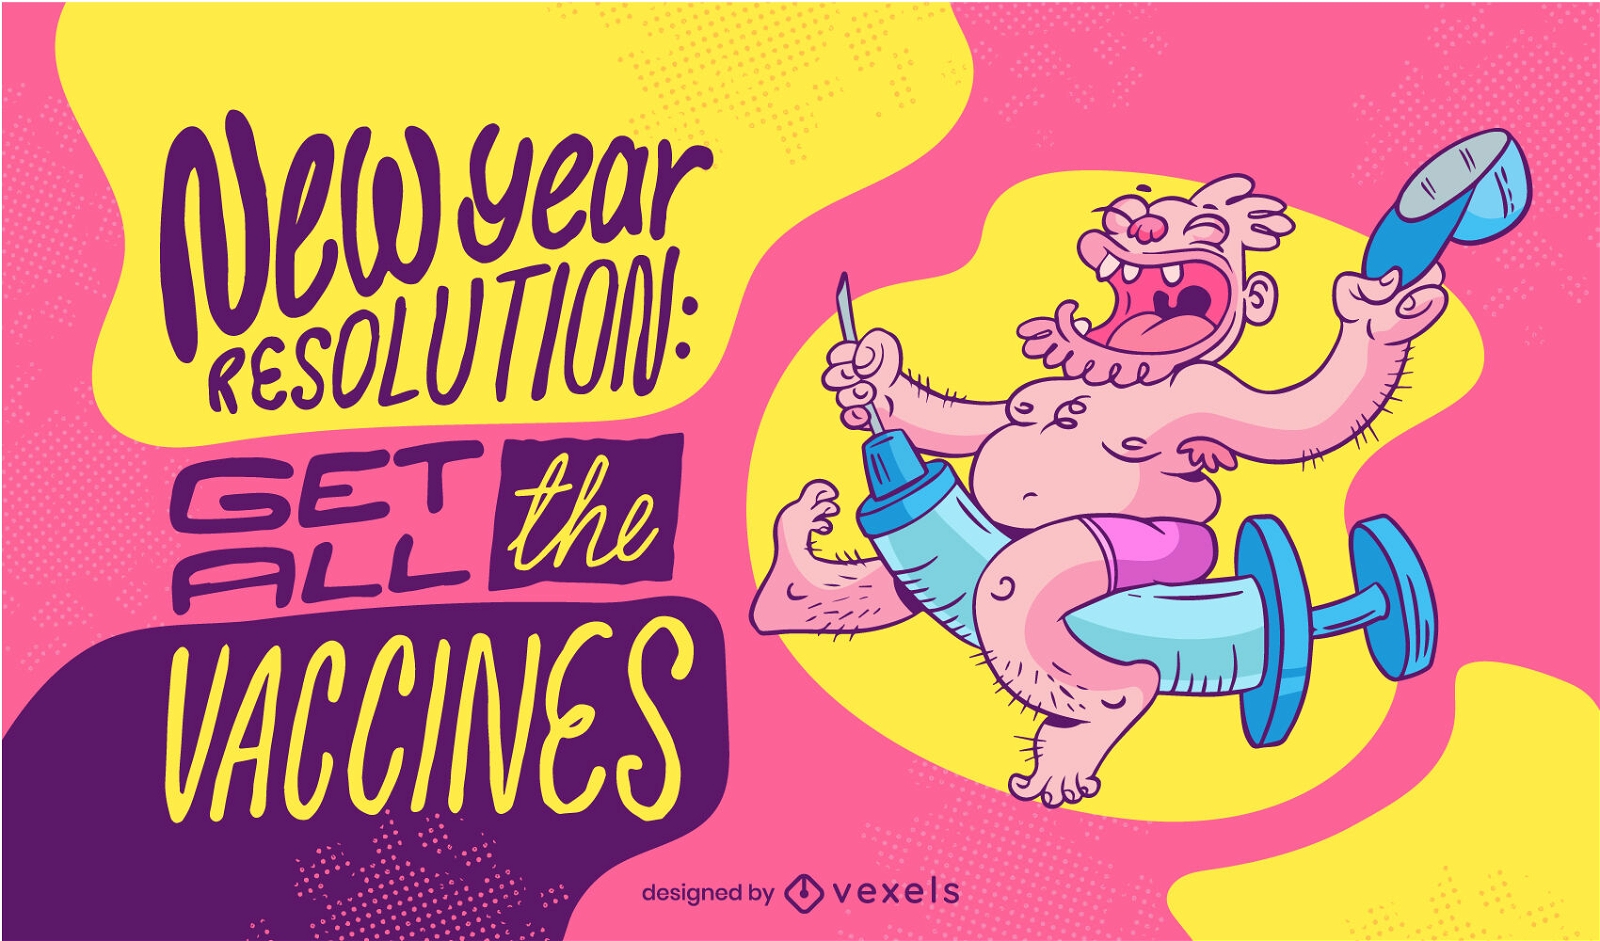 Man flying on a vaccine new year illustration